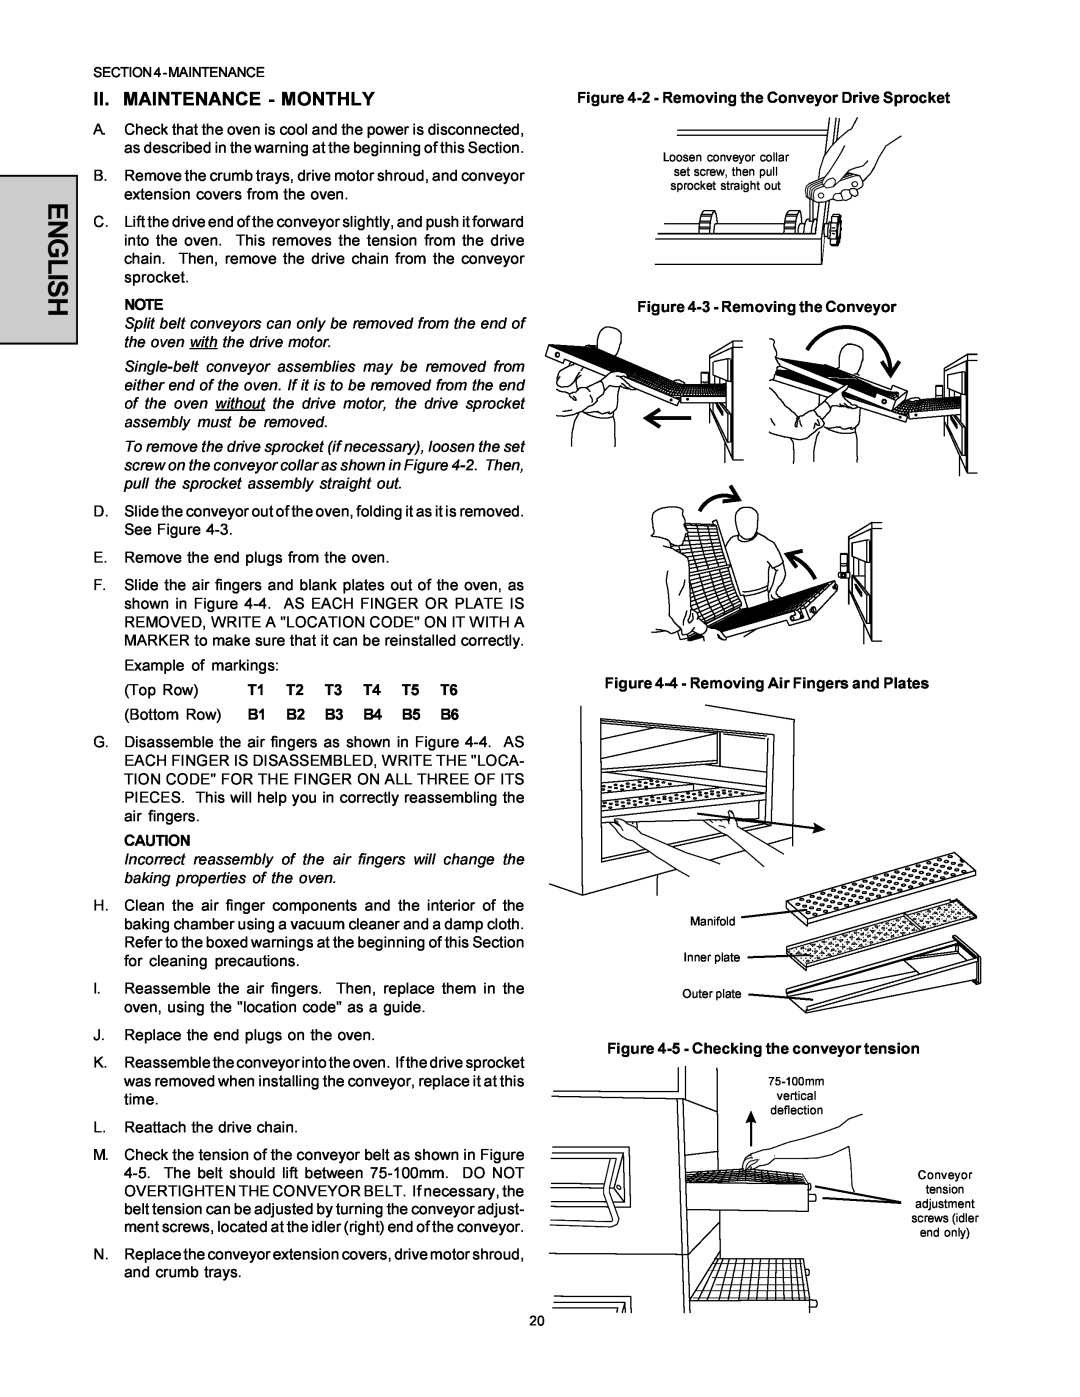 Middleby Marshall PS360-U installation manual English, Ii. Maintenance - Monthly, 2- Removing the Conveyor Drive Sprocket 